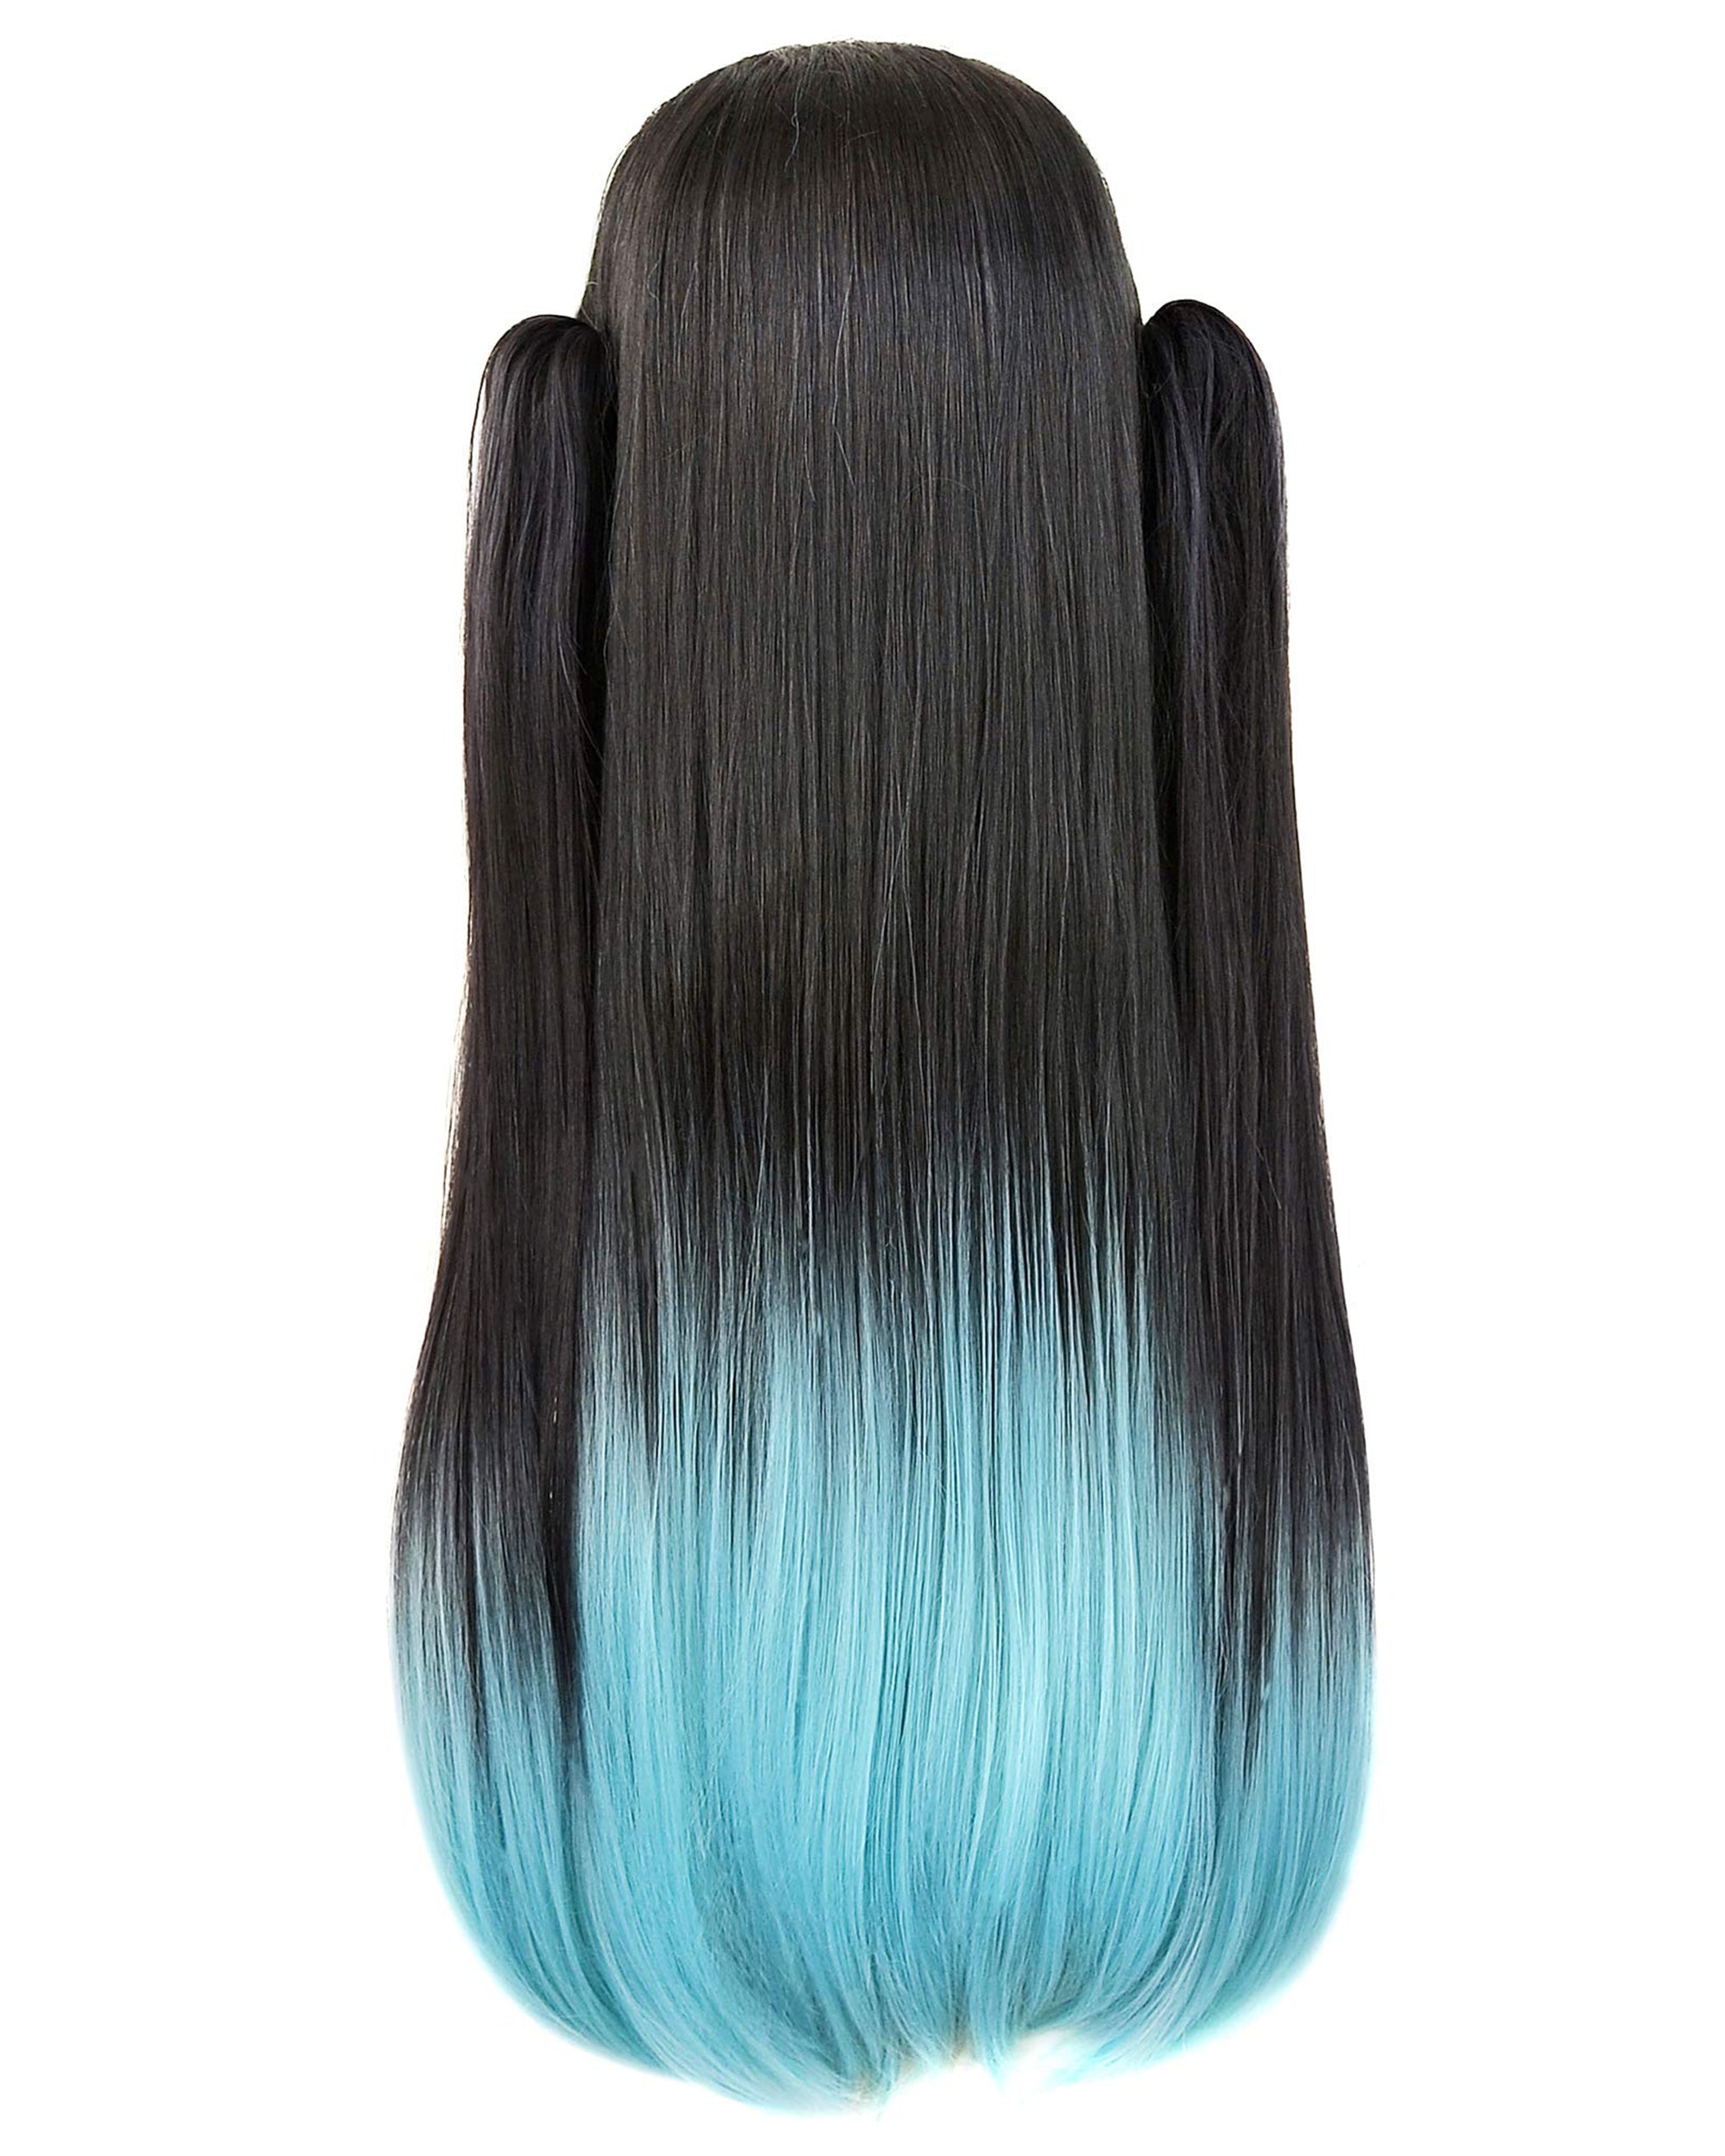 DAZCOS Tokitou Wig Unisex Anime Cosplay Long Gradient Black Blue Hair with Tail-Clips Black